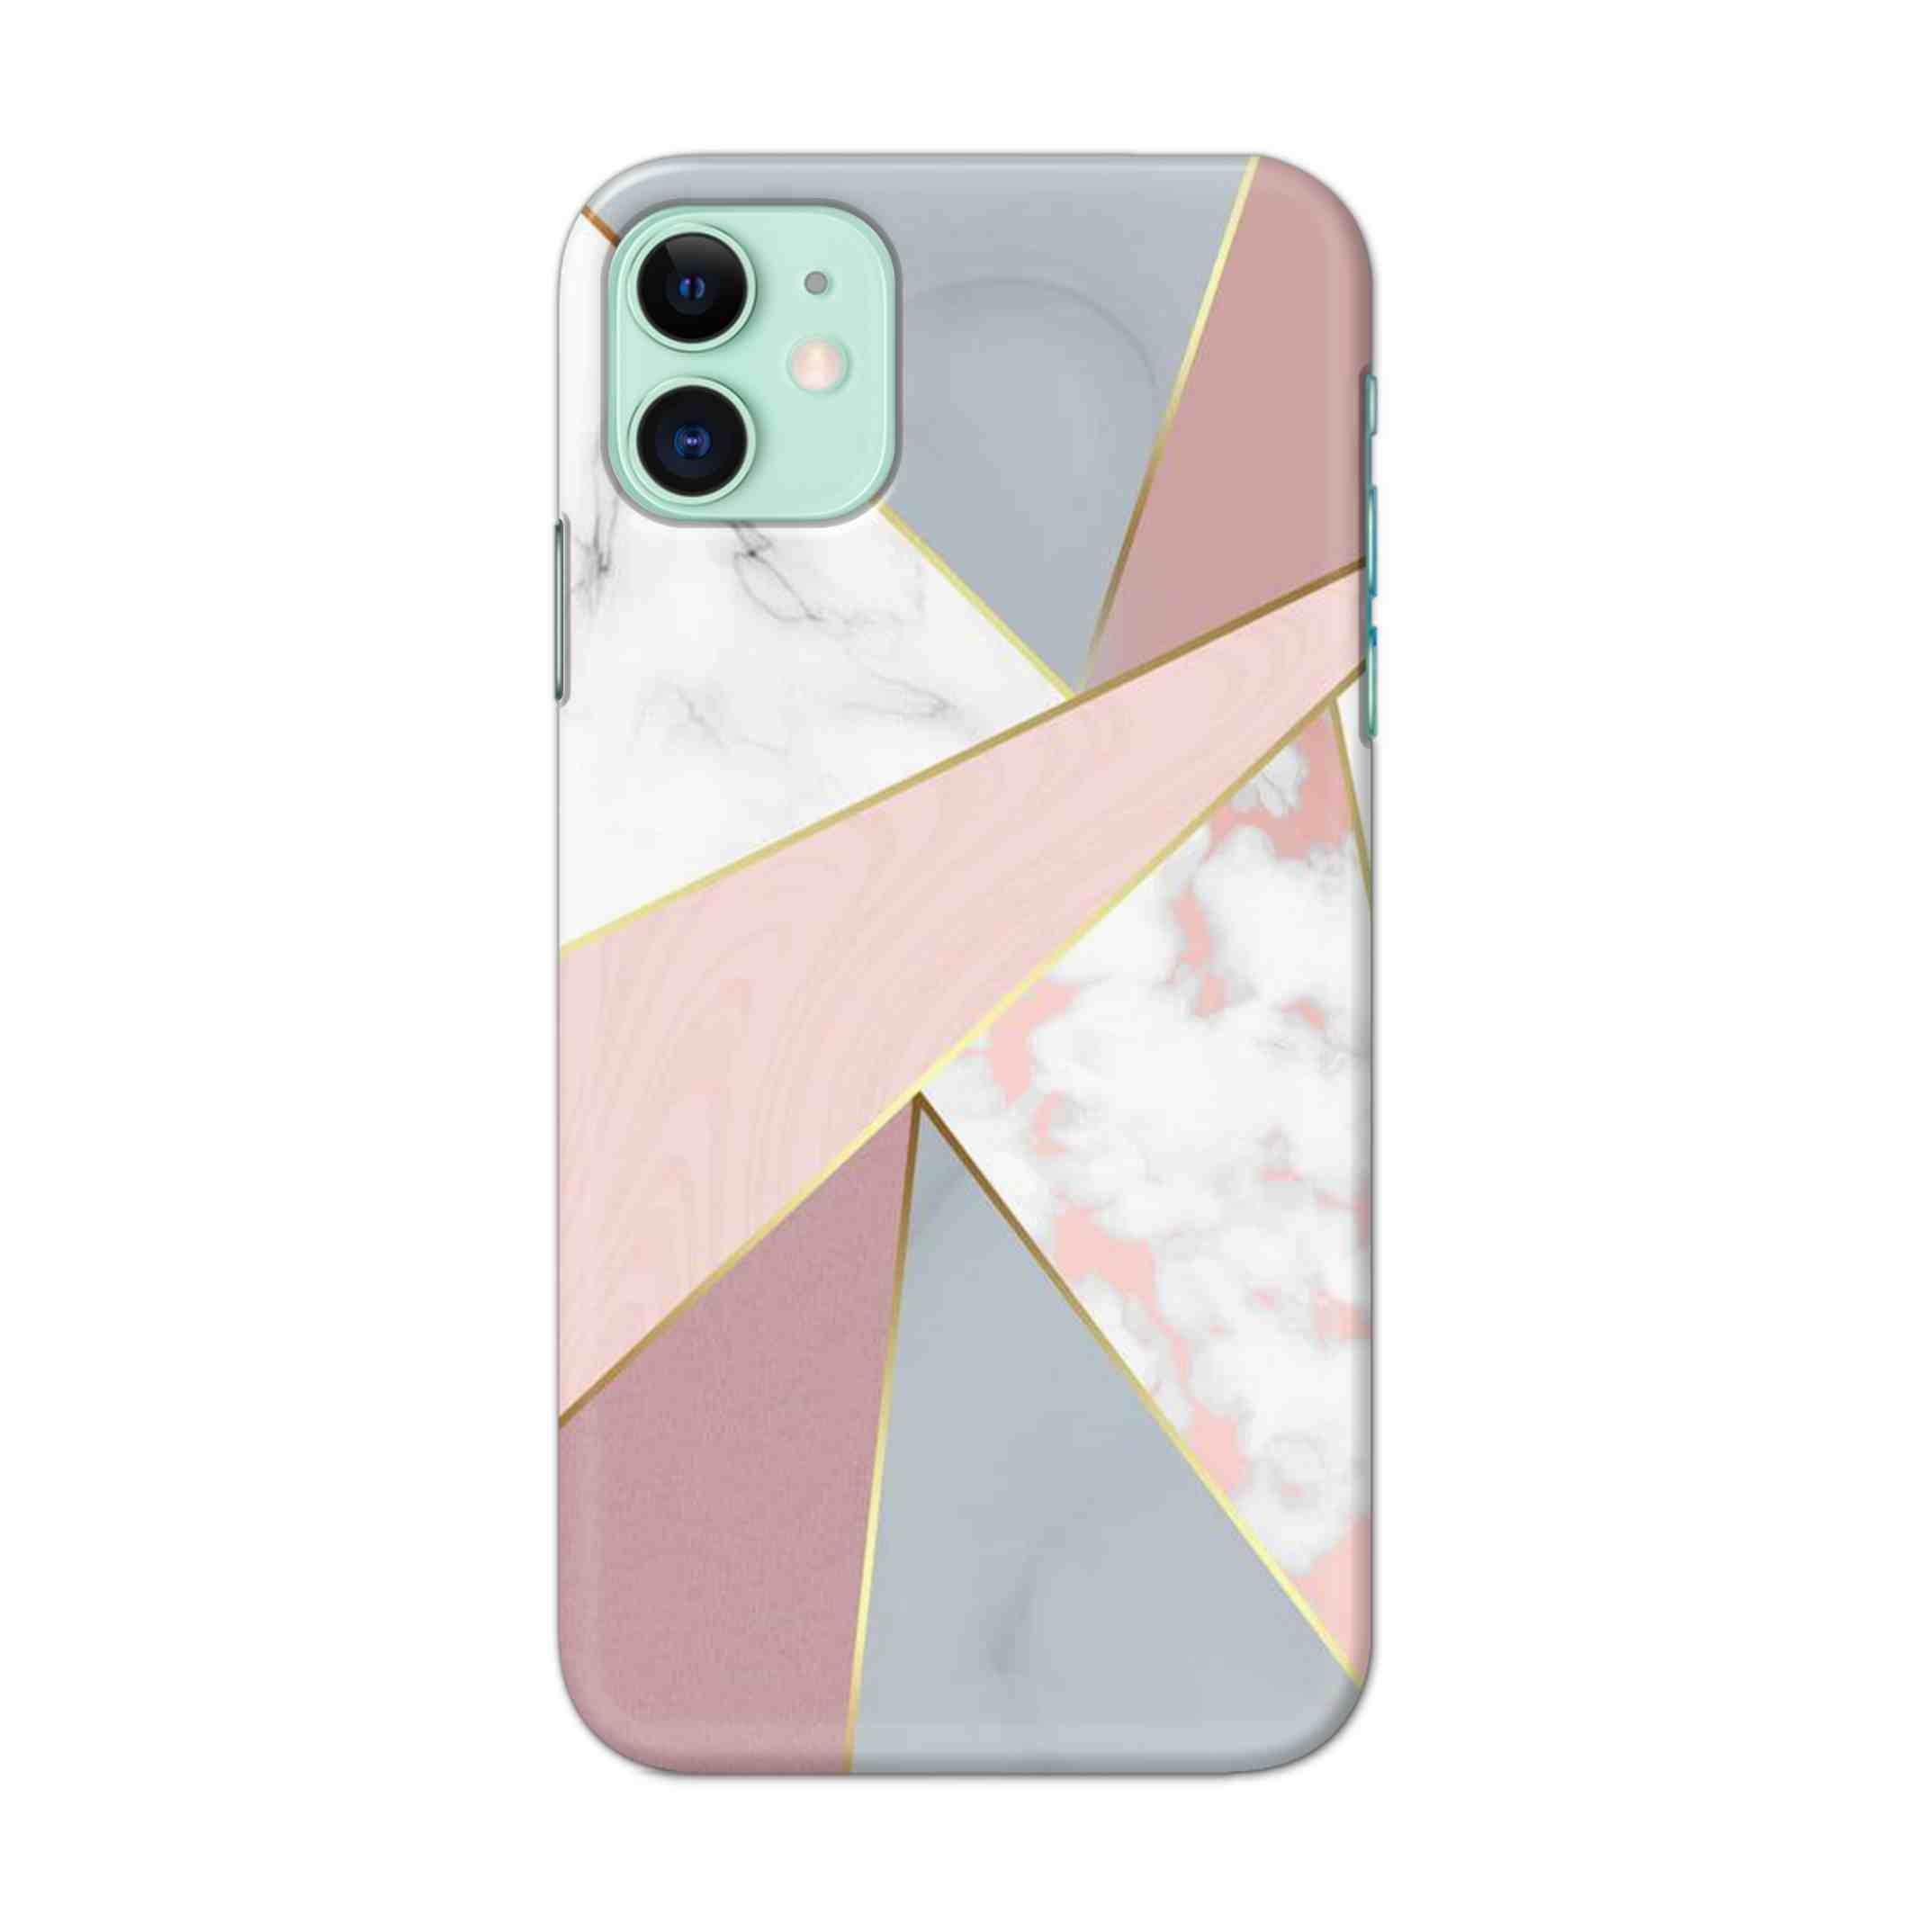 Buy Marble Shads Hard Back Mobile Phone Case Cover For iPhone 11 Online